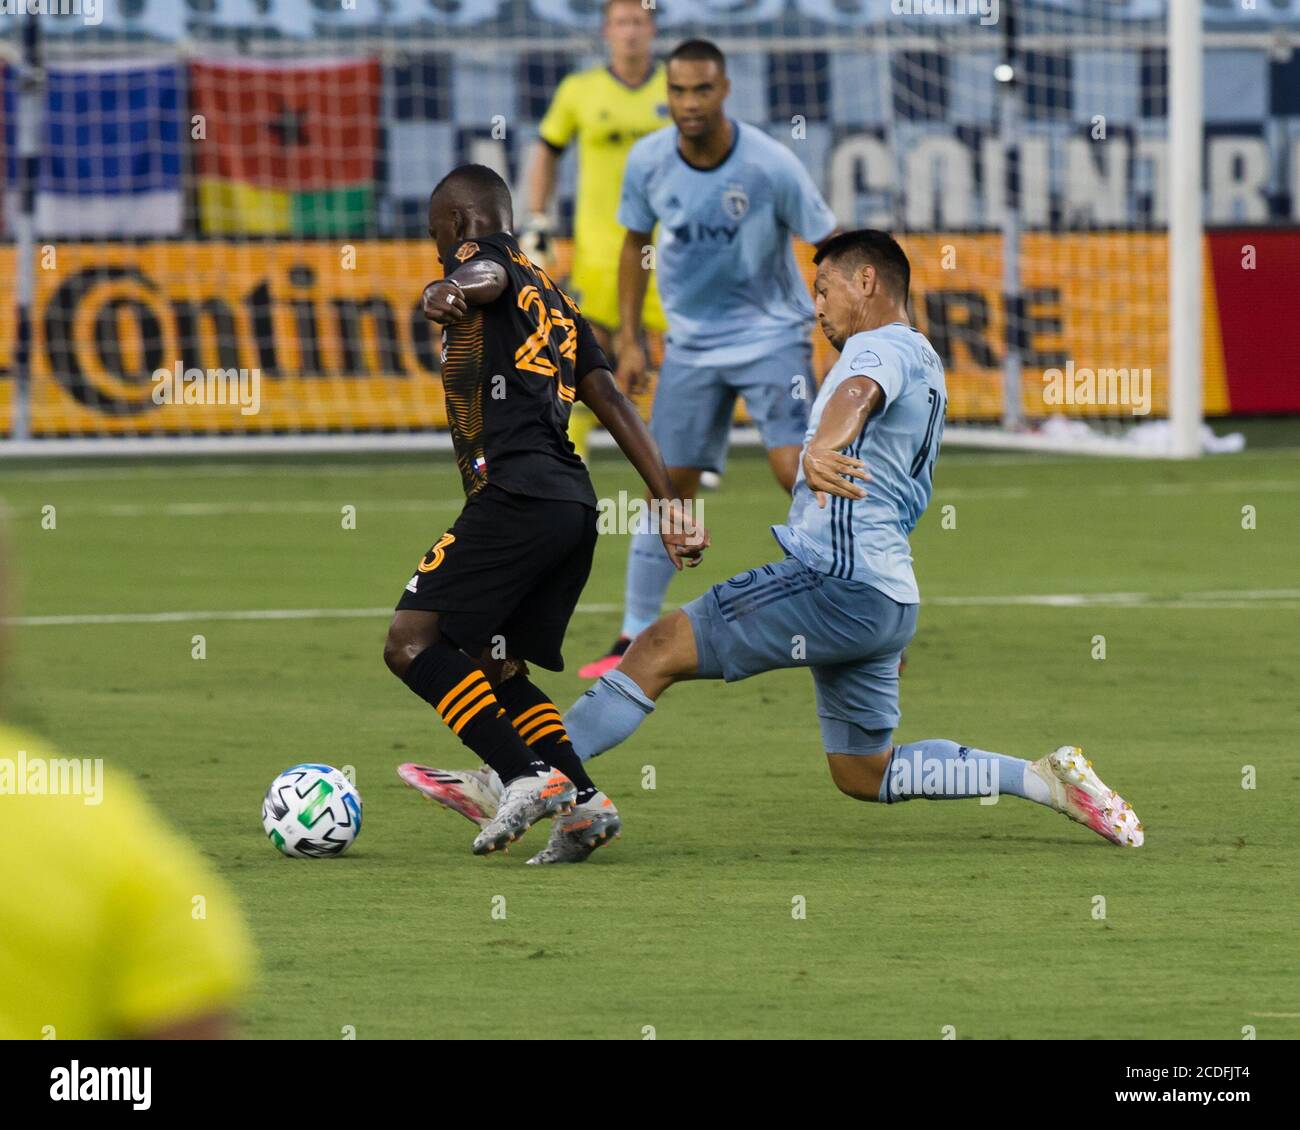 Kansas City, Kansas, USA. 25th Aug, 2020. Sporting KC midfielder Roger Espinoza #15 (r) makes a defensive tackle against Houston Dynamo forward Darwin Quintero #23 (l) during the first half of the game. Credit: Serena S.Y. Hsu/ZUMA Wire/Alamy Live News Stock Photo